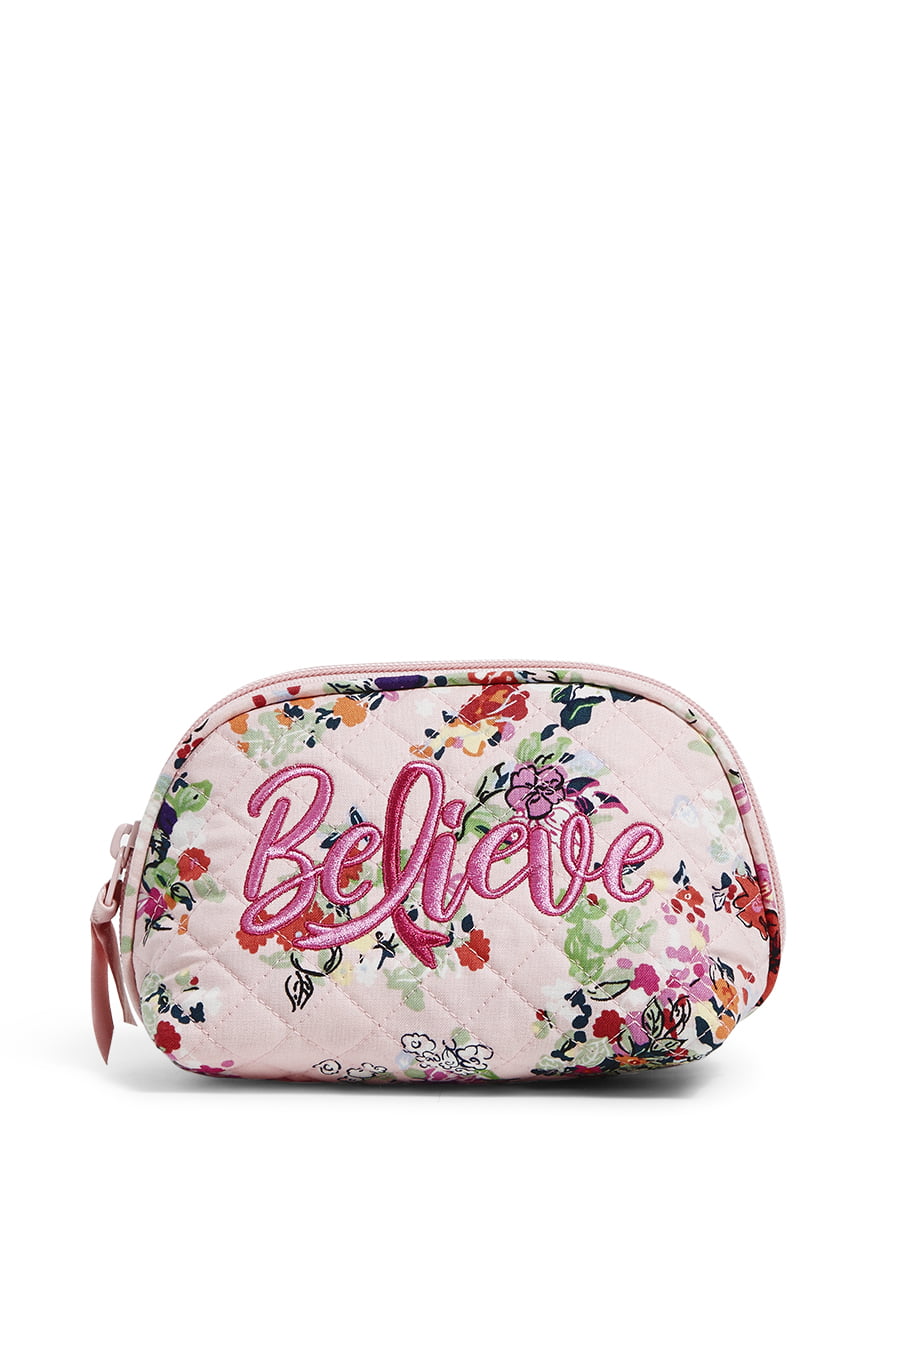 Vera Bradley Women's Recycled Cotton Embellished Clamshell Cosmetic Bag  Hope Blooms Pink